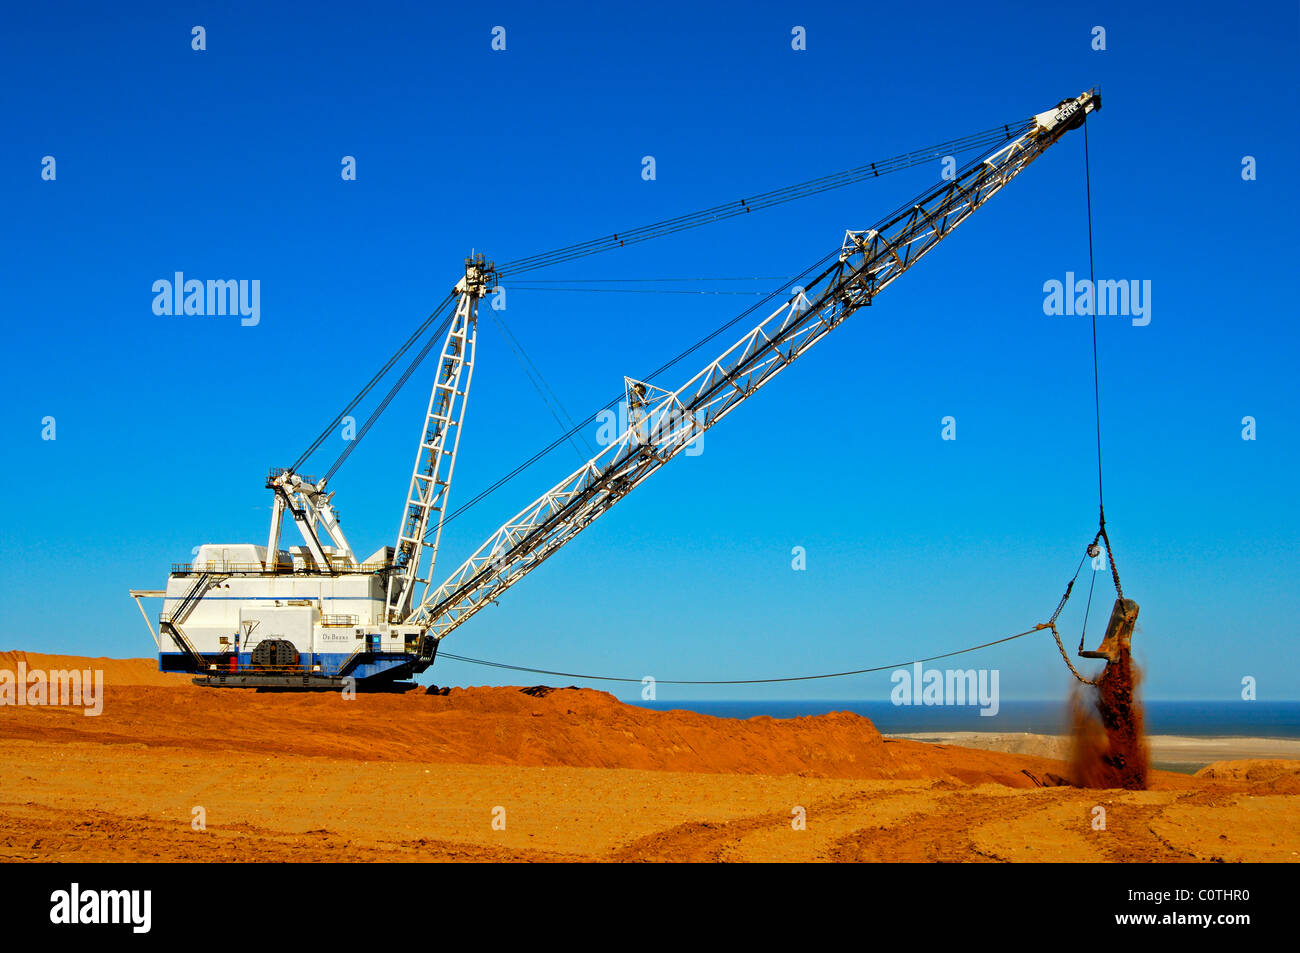 Earthworks with a dragline excavator in the De Beers Namaqualand Mines, Kleinzee, Namaqualand, South Africa Stock Photo